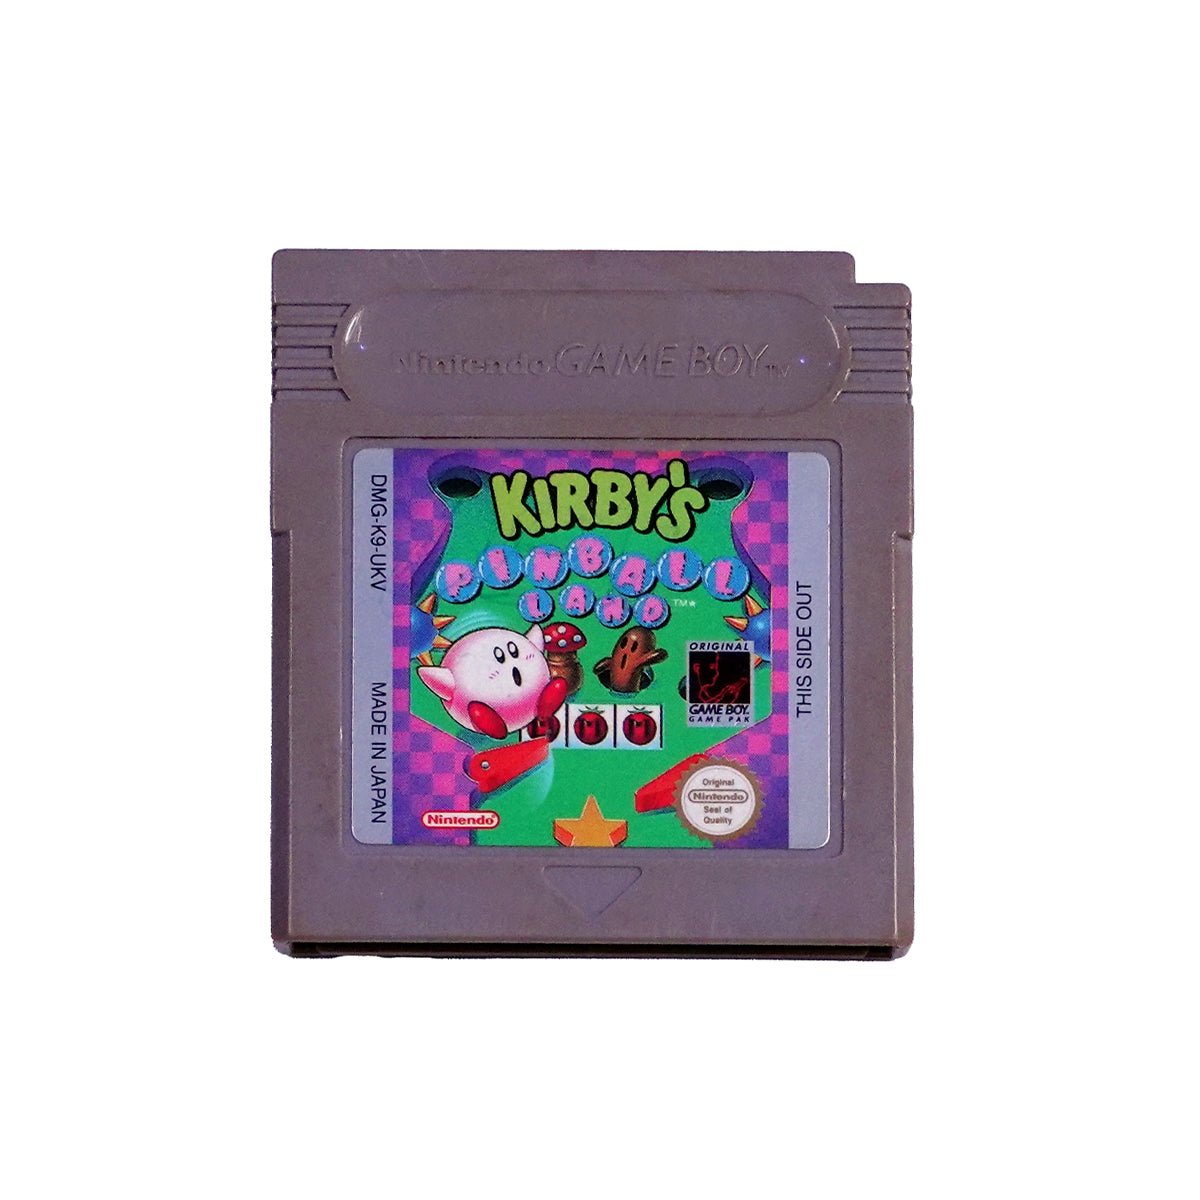 (Pre-Owned) Kirby's Pinball Land - Gameboy Classic Game - ريترو - Store 974 | ستور ٩٧٤